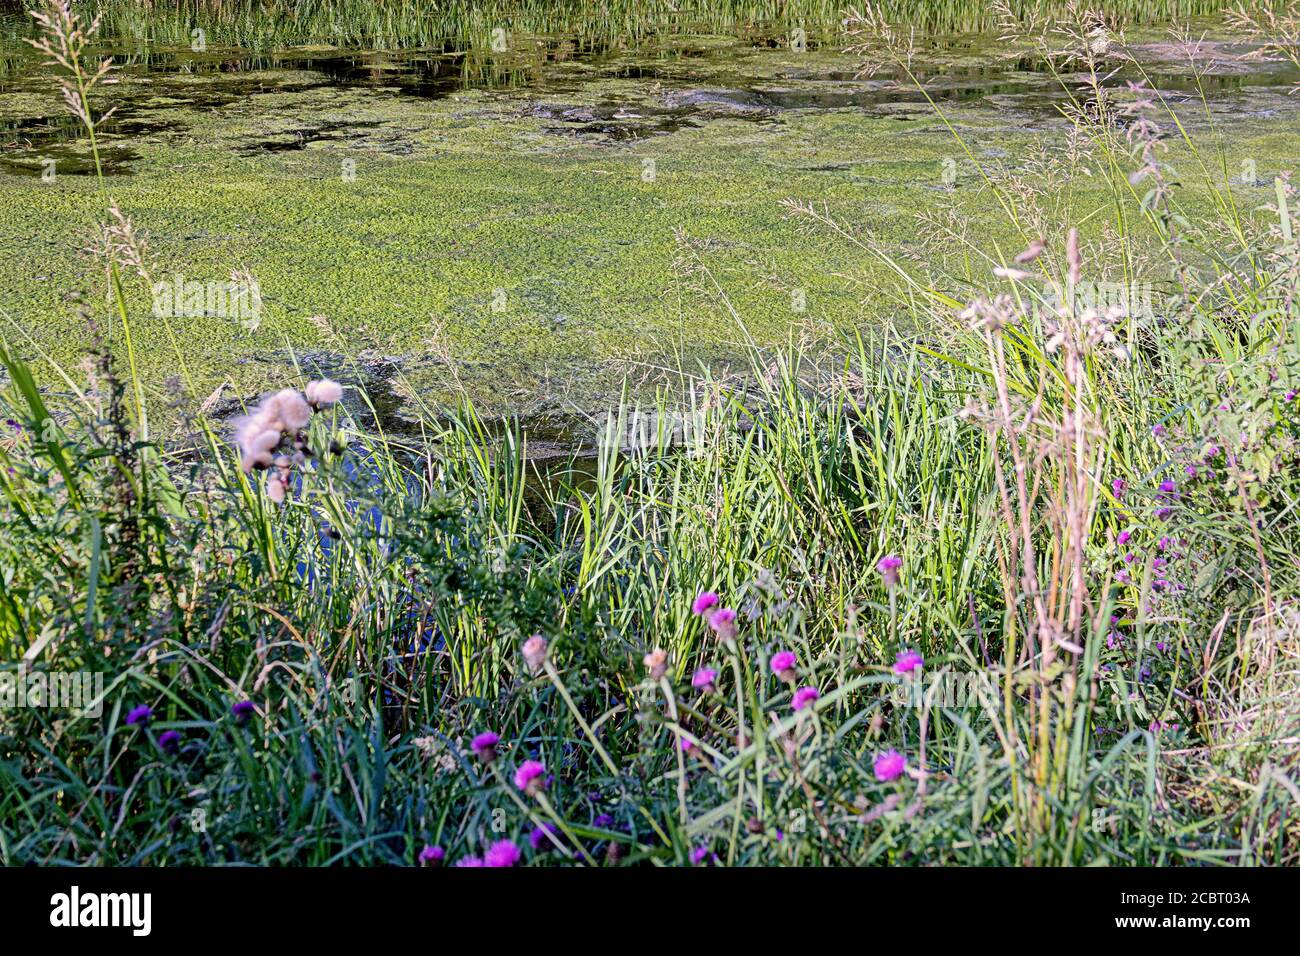 Glasgow, Scotland, UK  15th August, 2020: Poisonous blue-green algae n the forth and clyde canal made worse by the hot weather. Credit: Gerard Ferry/Alamy Live News Stock Photo